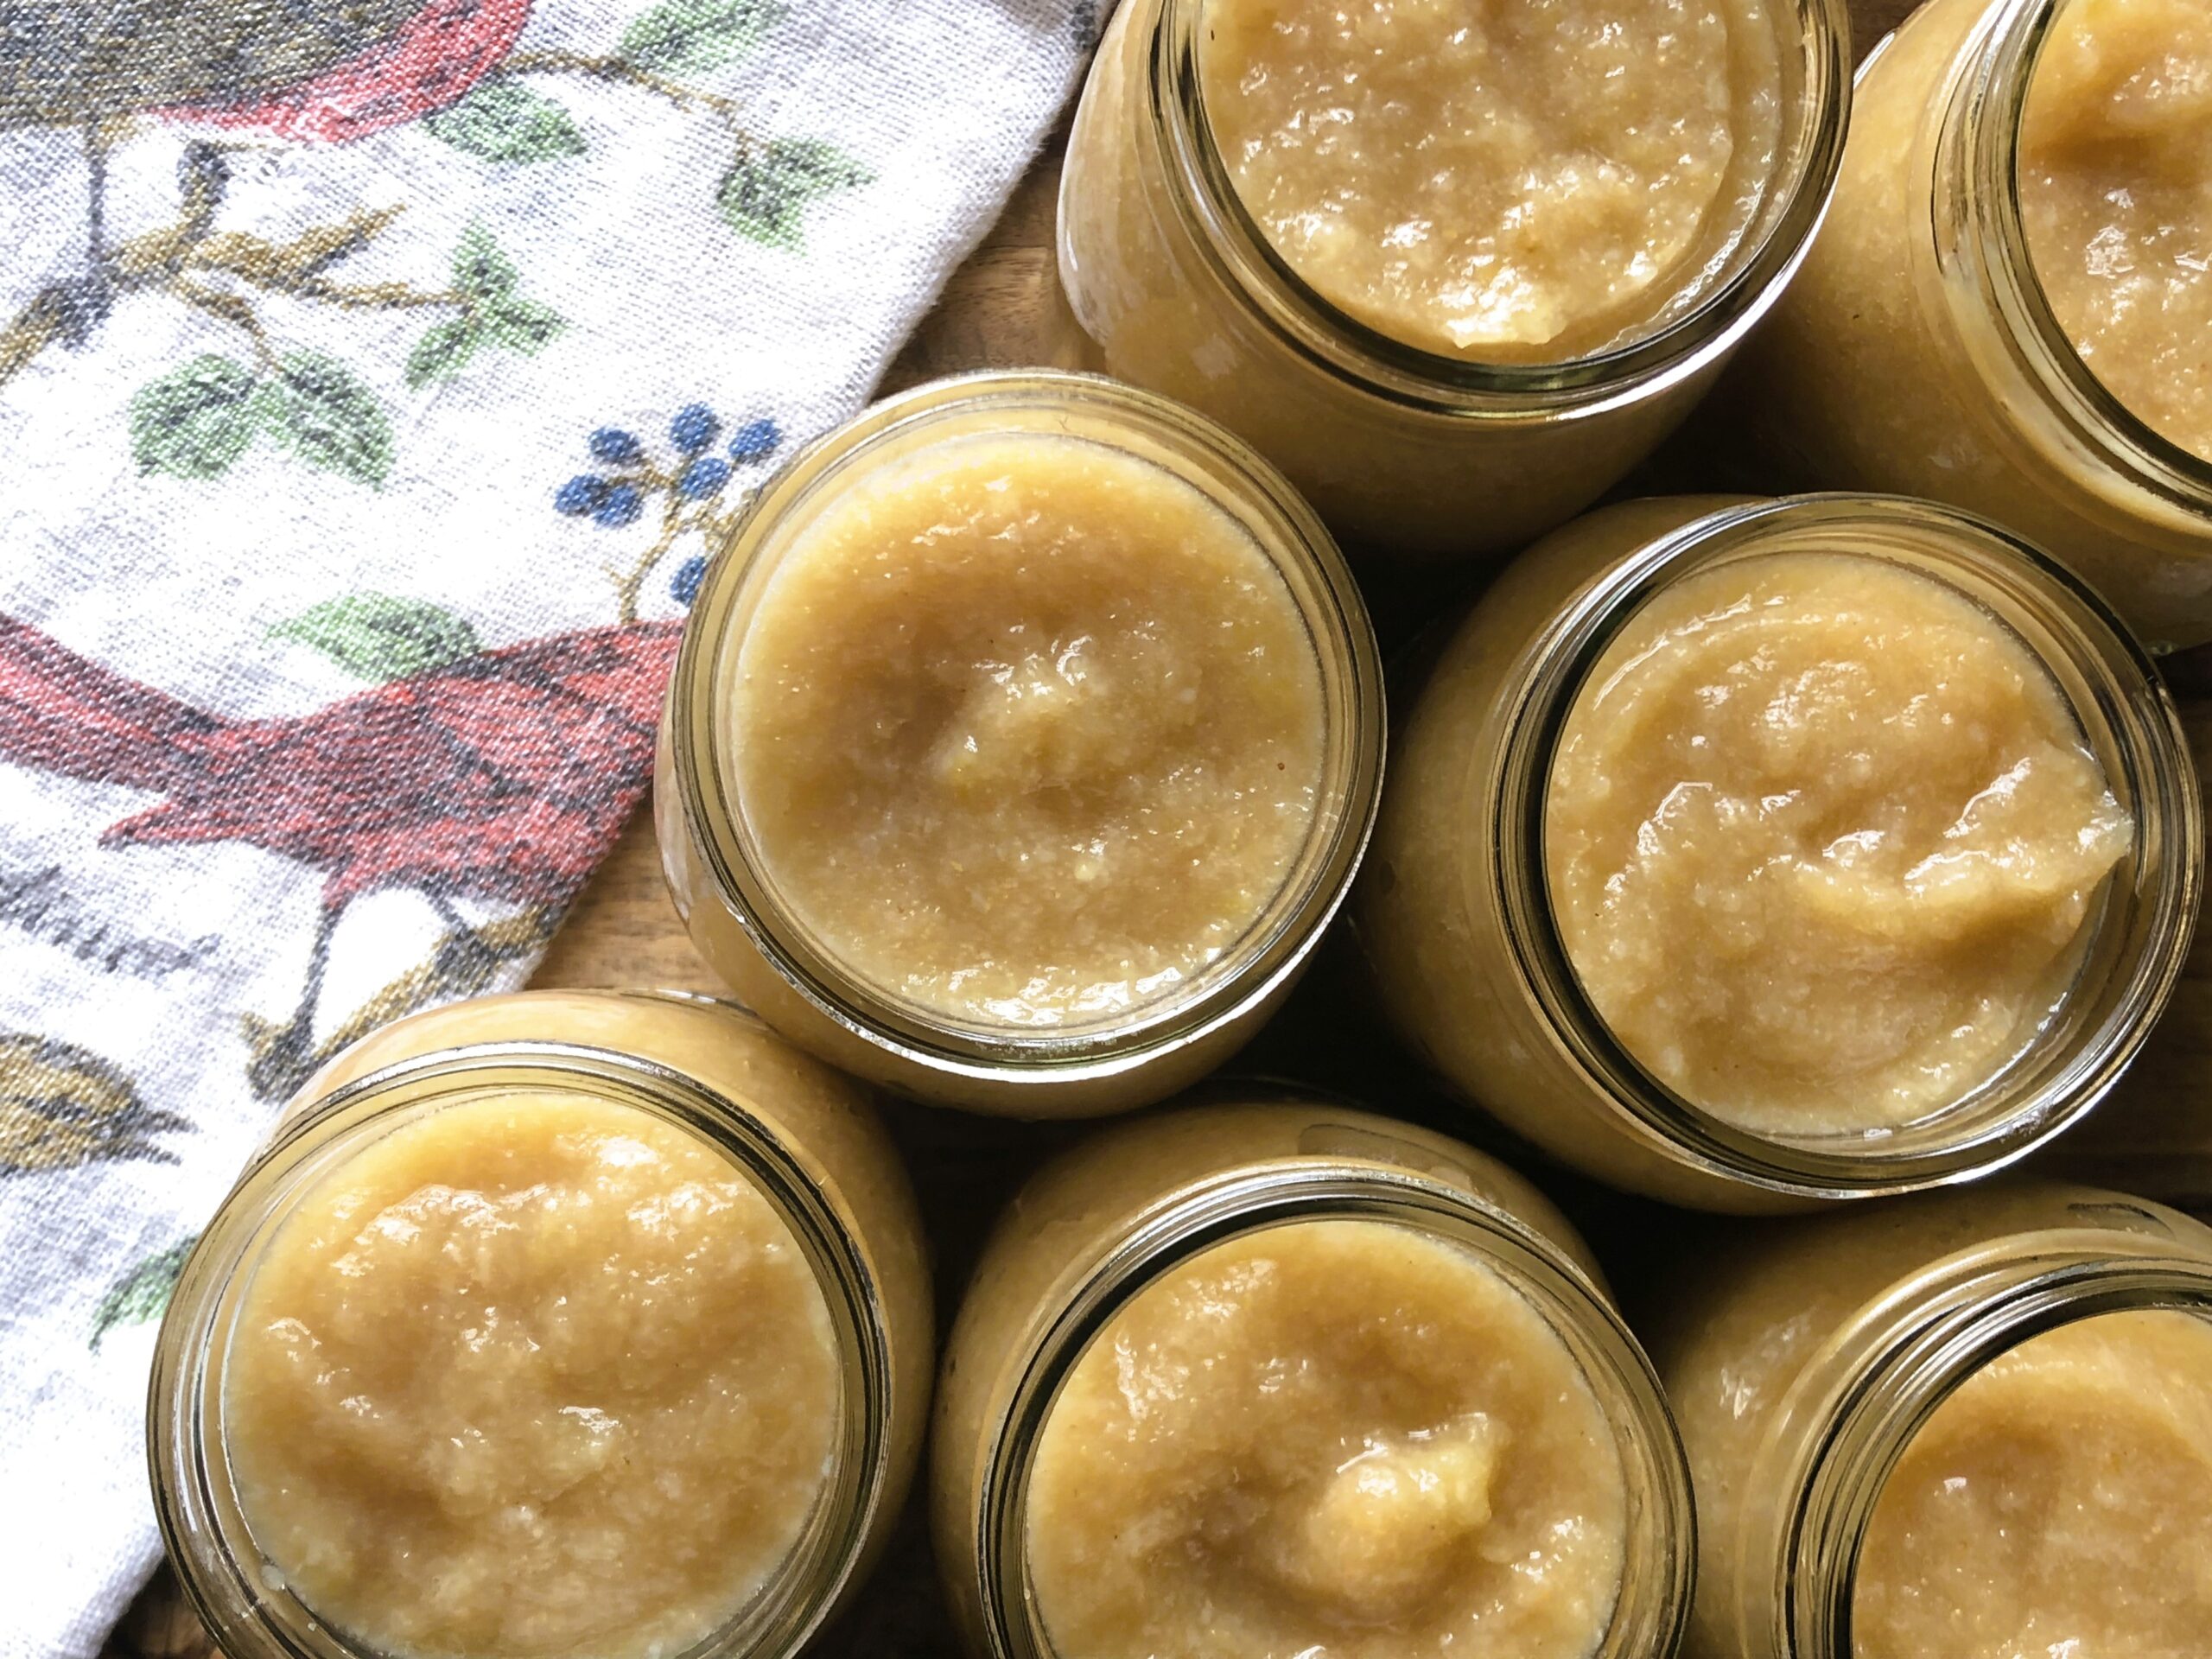 You'll love this easy, delicious recipe for homemade sugar free applesauce.